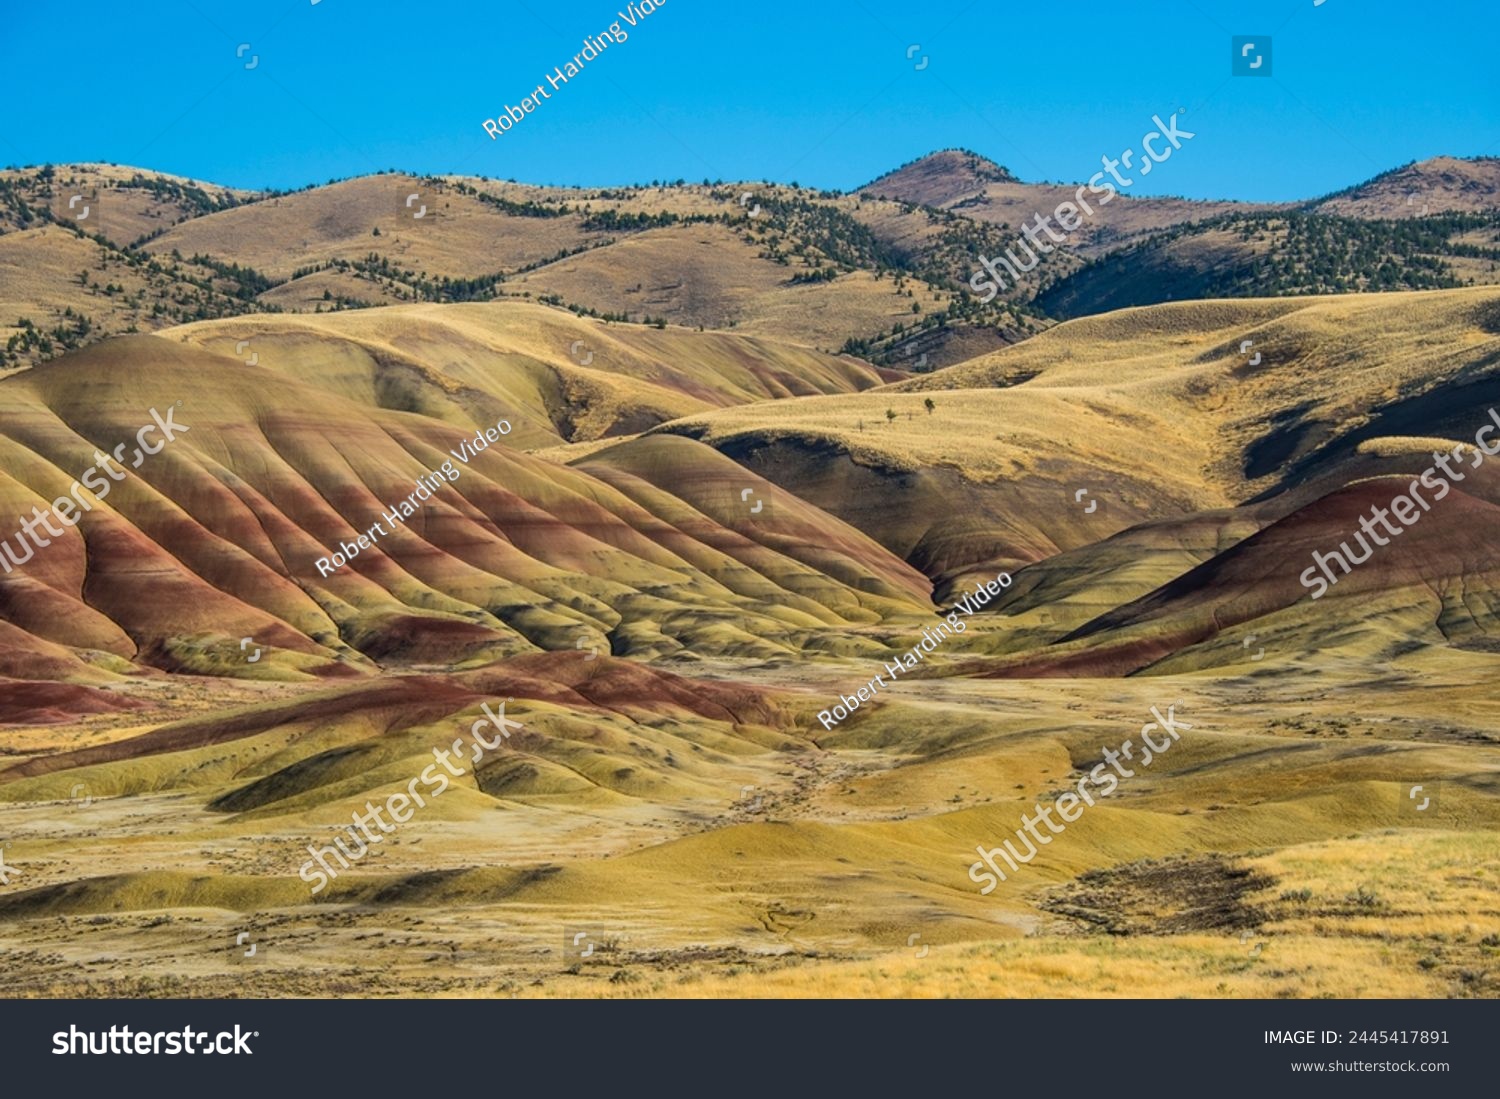 Multicoloured strata in the Painted Hills unit in the John Day Fossil Beds National Monument, Oregon, United States of America, North America #2445417891